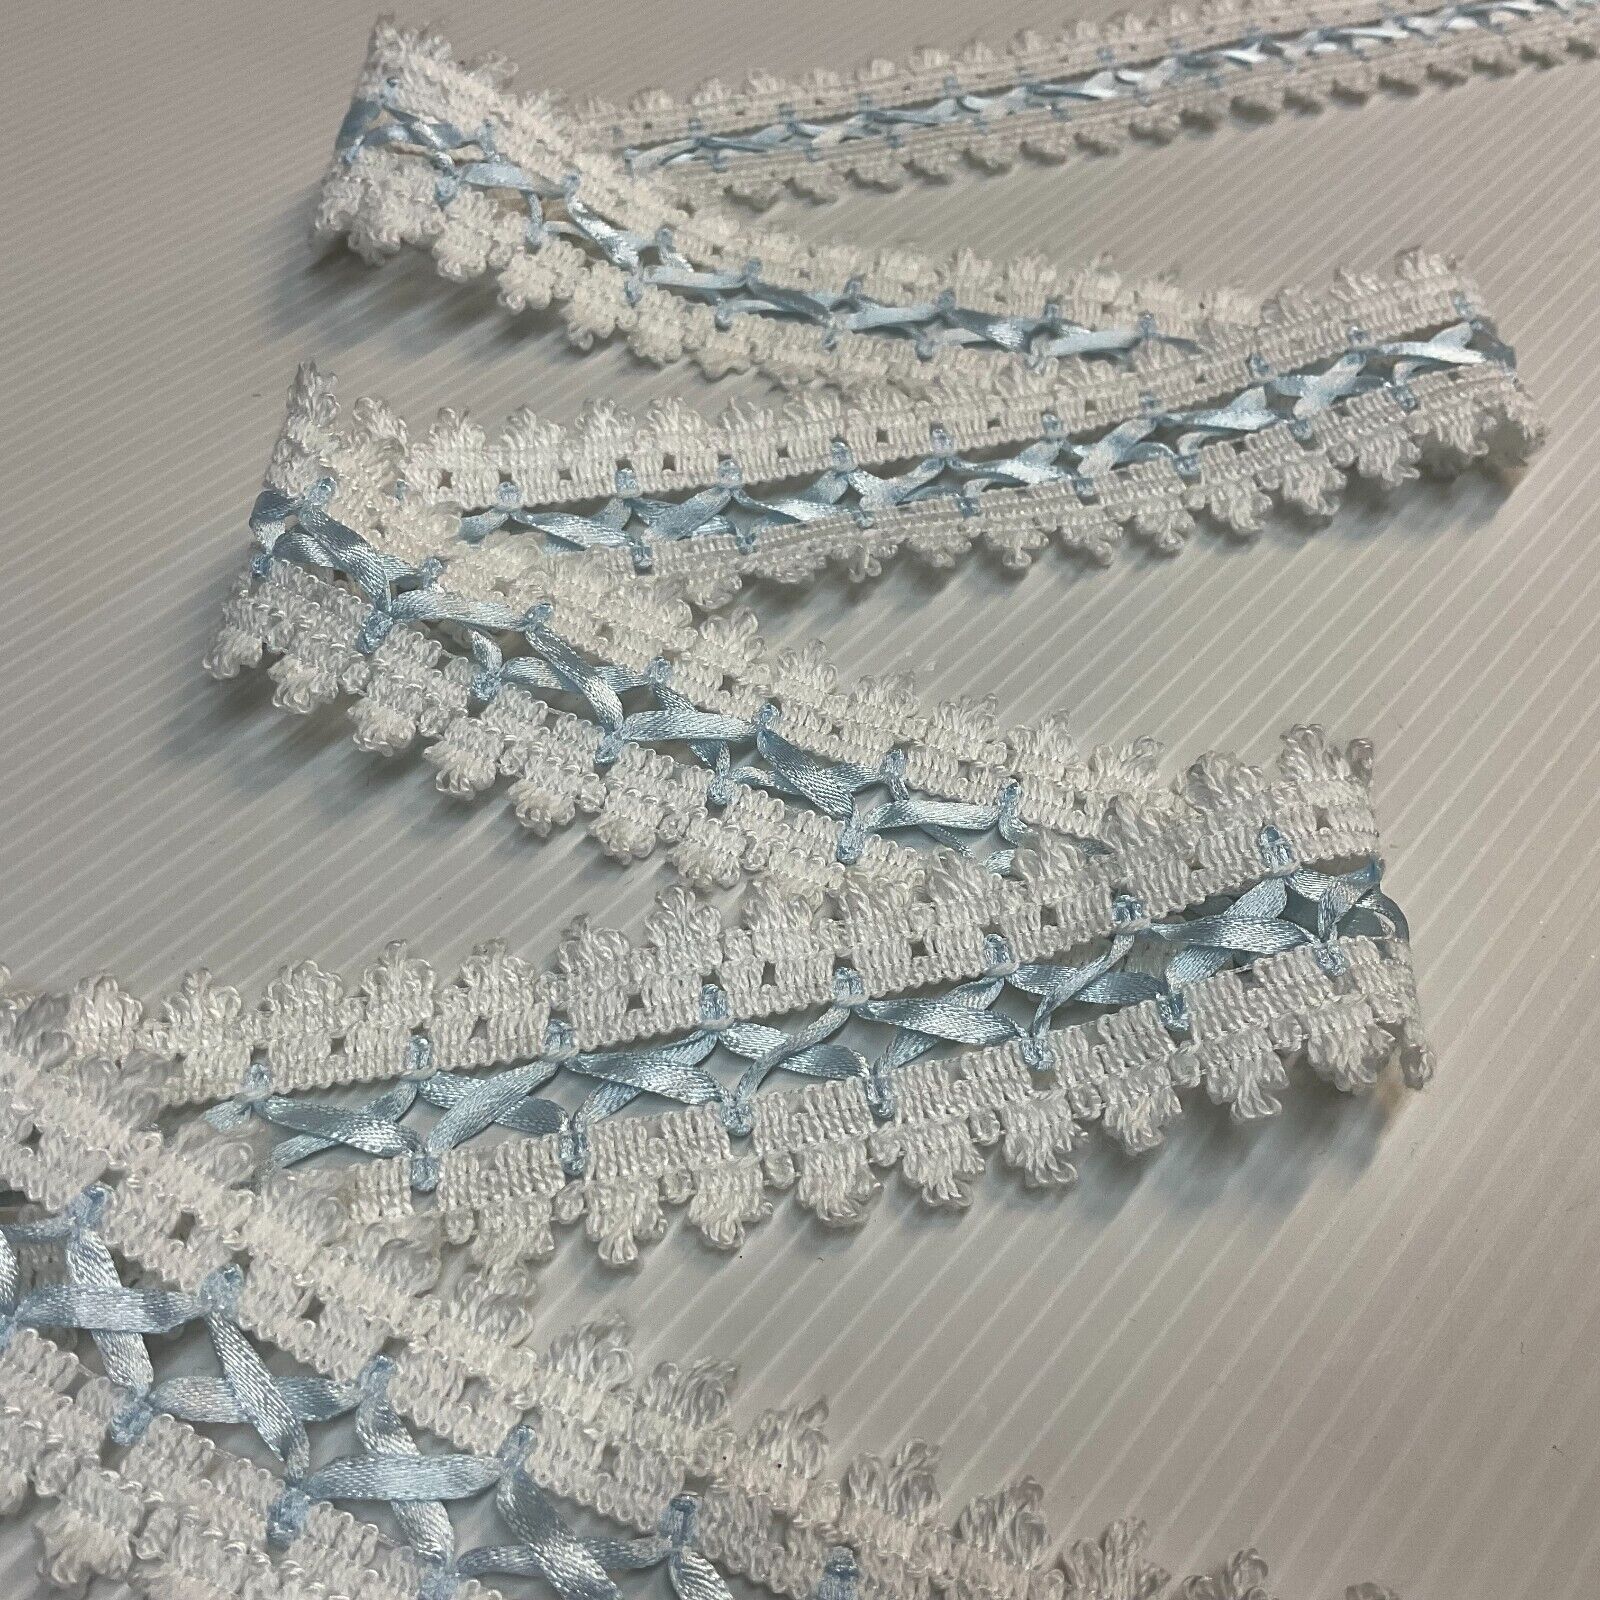 35mm wide Ribbon Lace trimming edging border M1720